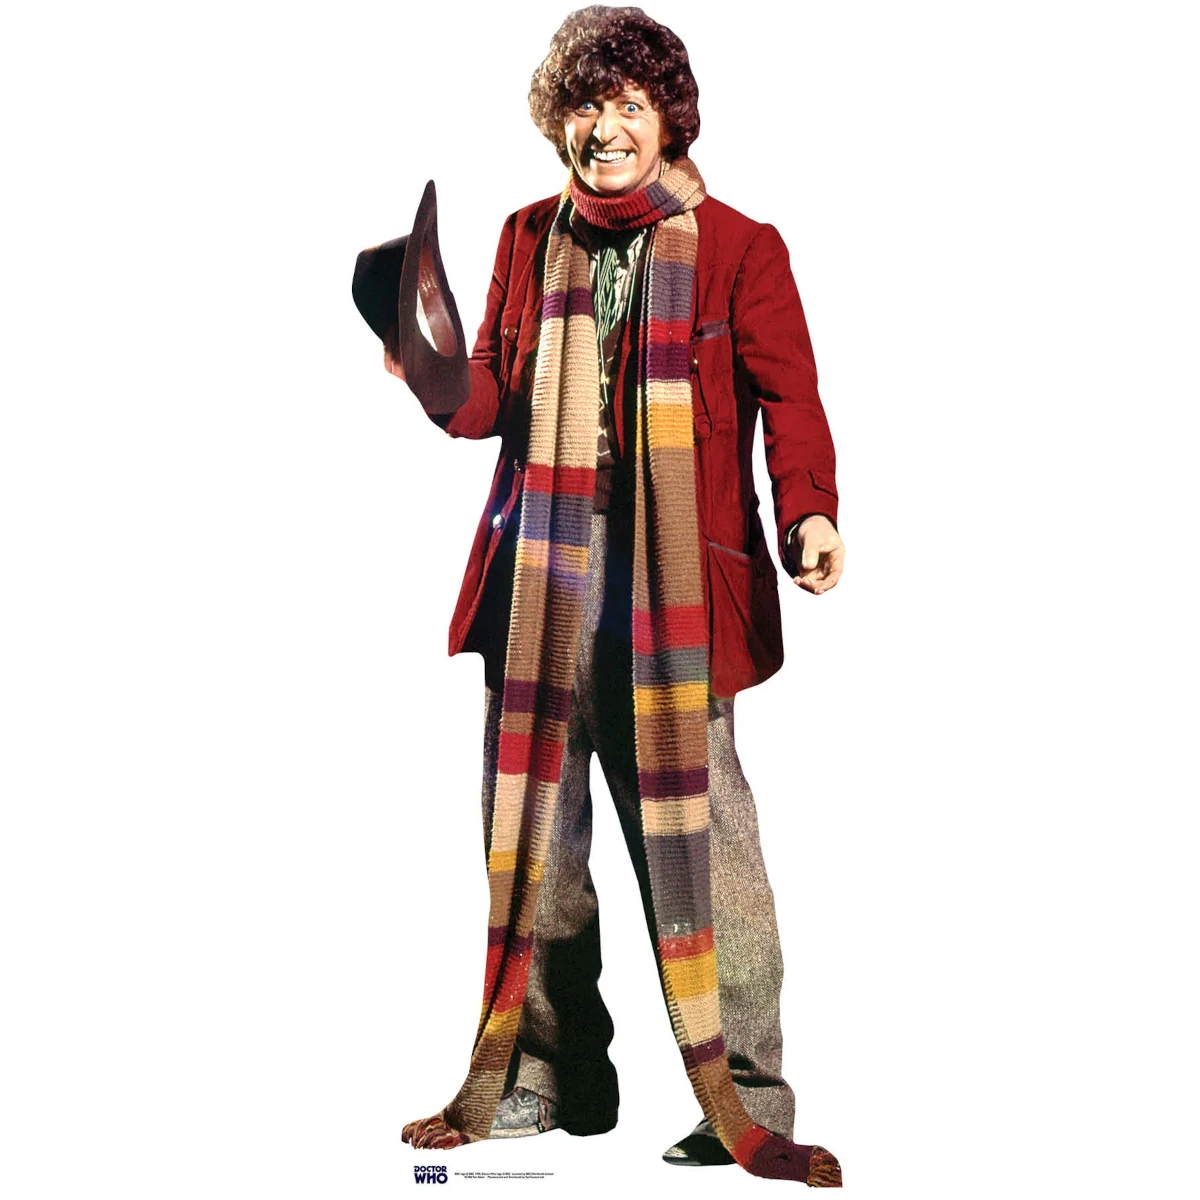 SC406 The Fourth Doctor 'Tom Baker' (Doctor Who) Official Lifesize Cardboard Cutout Standee Front